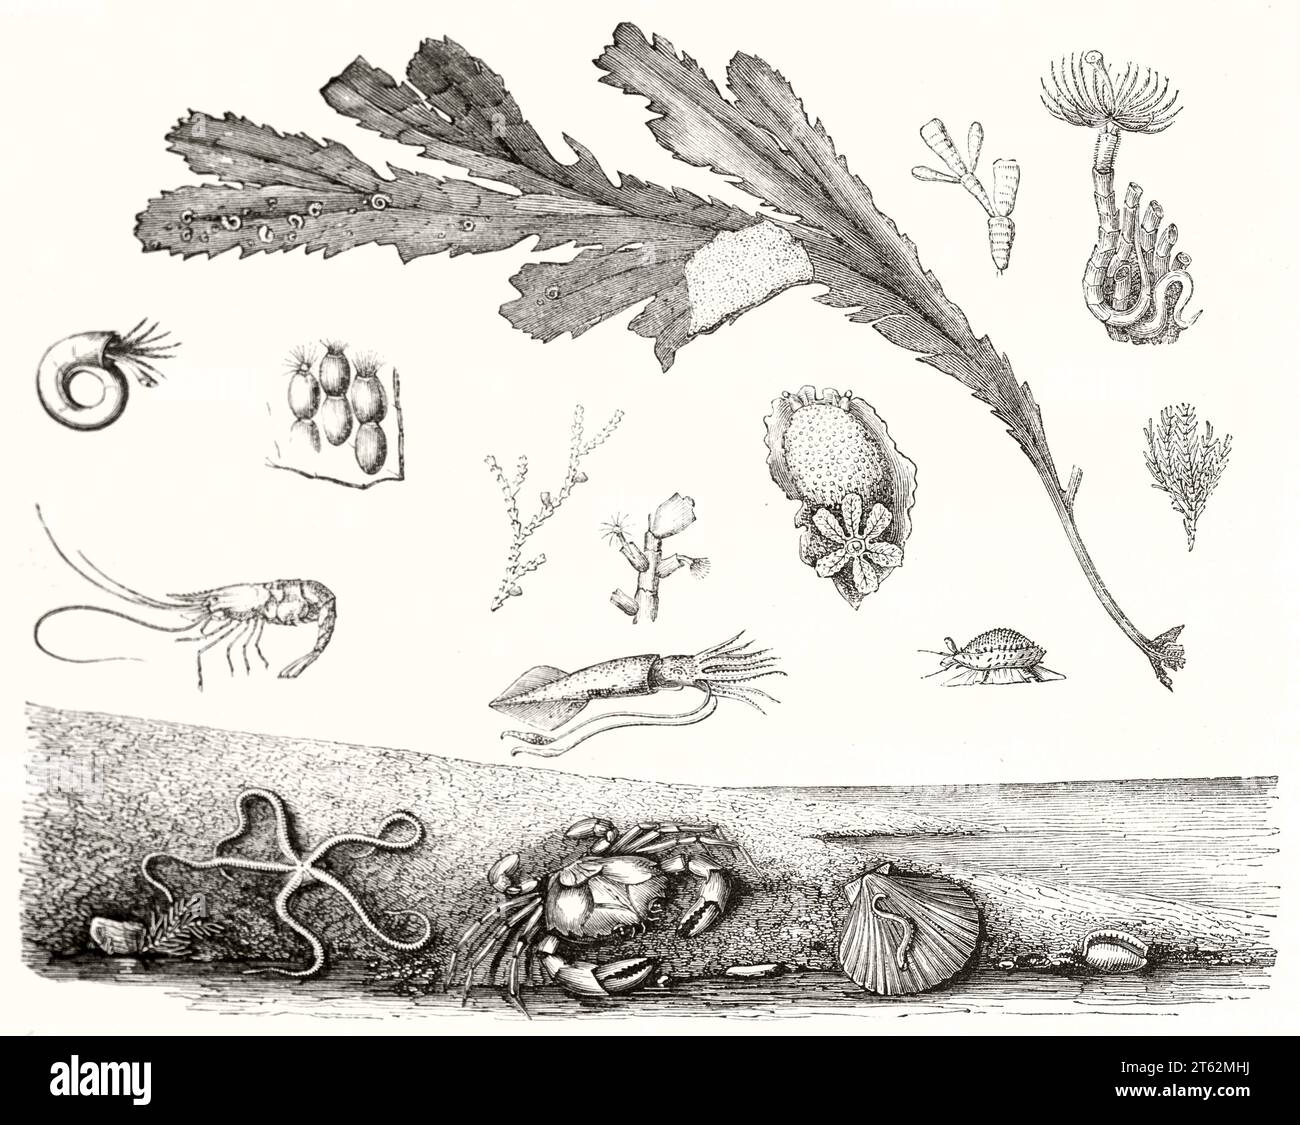 Old illustration of beach organisms. By Bevalet, publ. on Magasin Pittoresque, Paris, 1849 Stock Photo